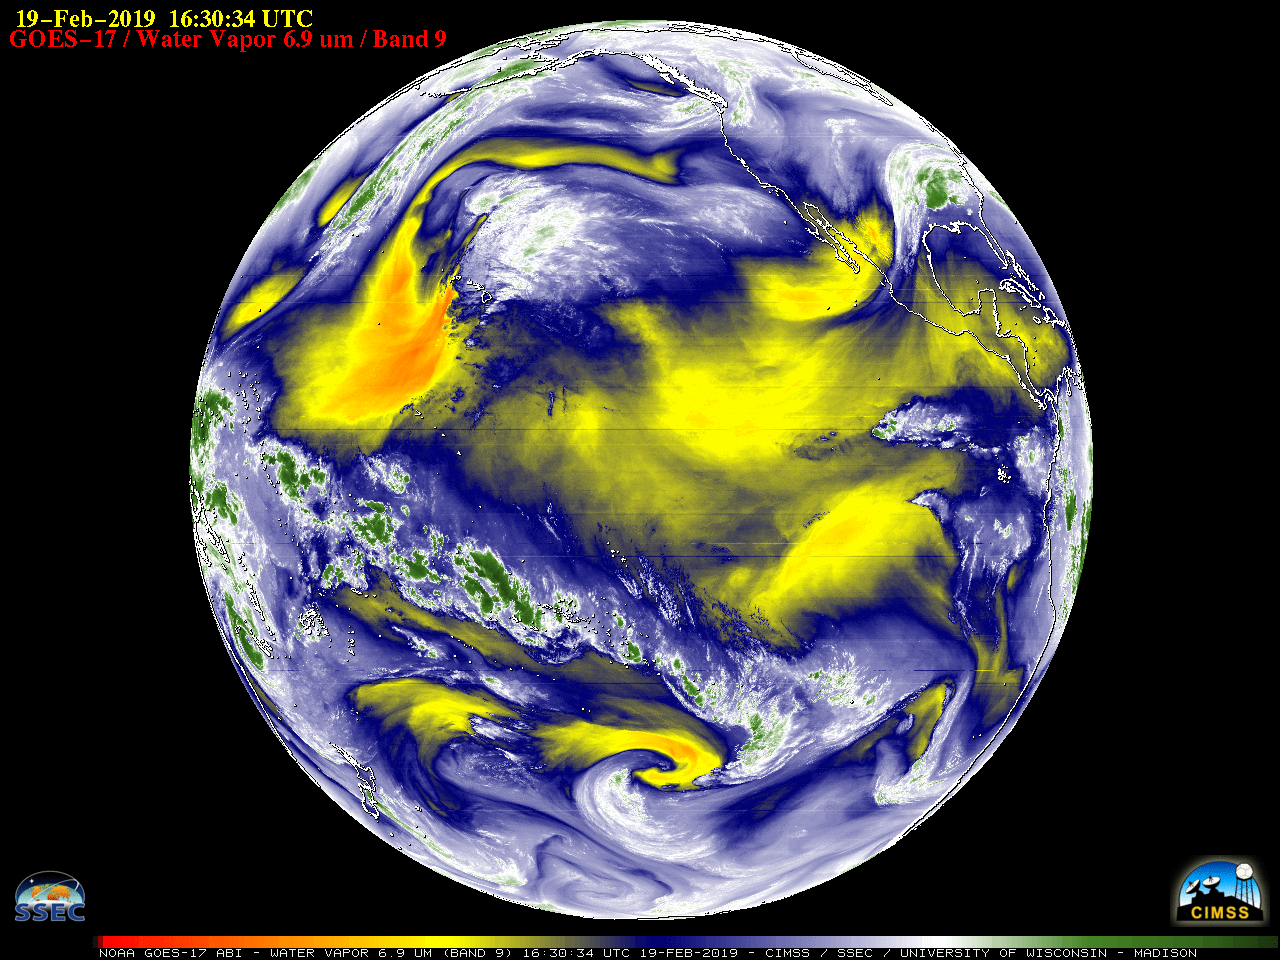 GOES-17 Mid-level Water Vapor (6.9 µm) images [click to play animation]